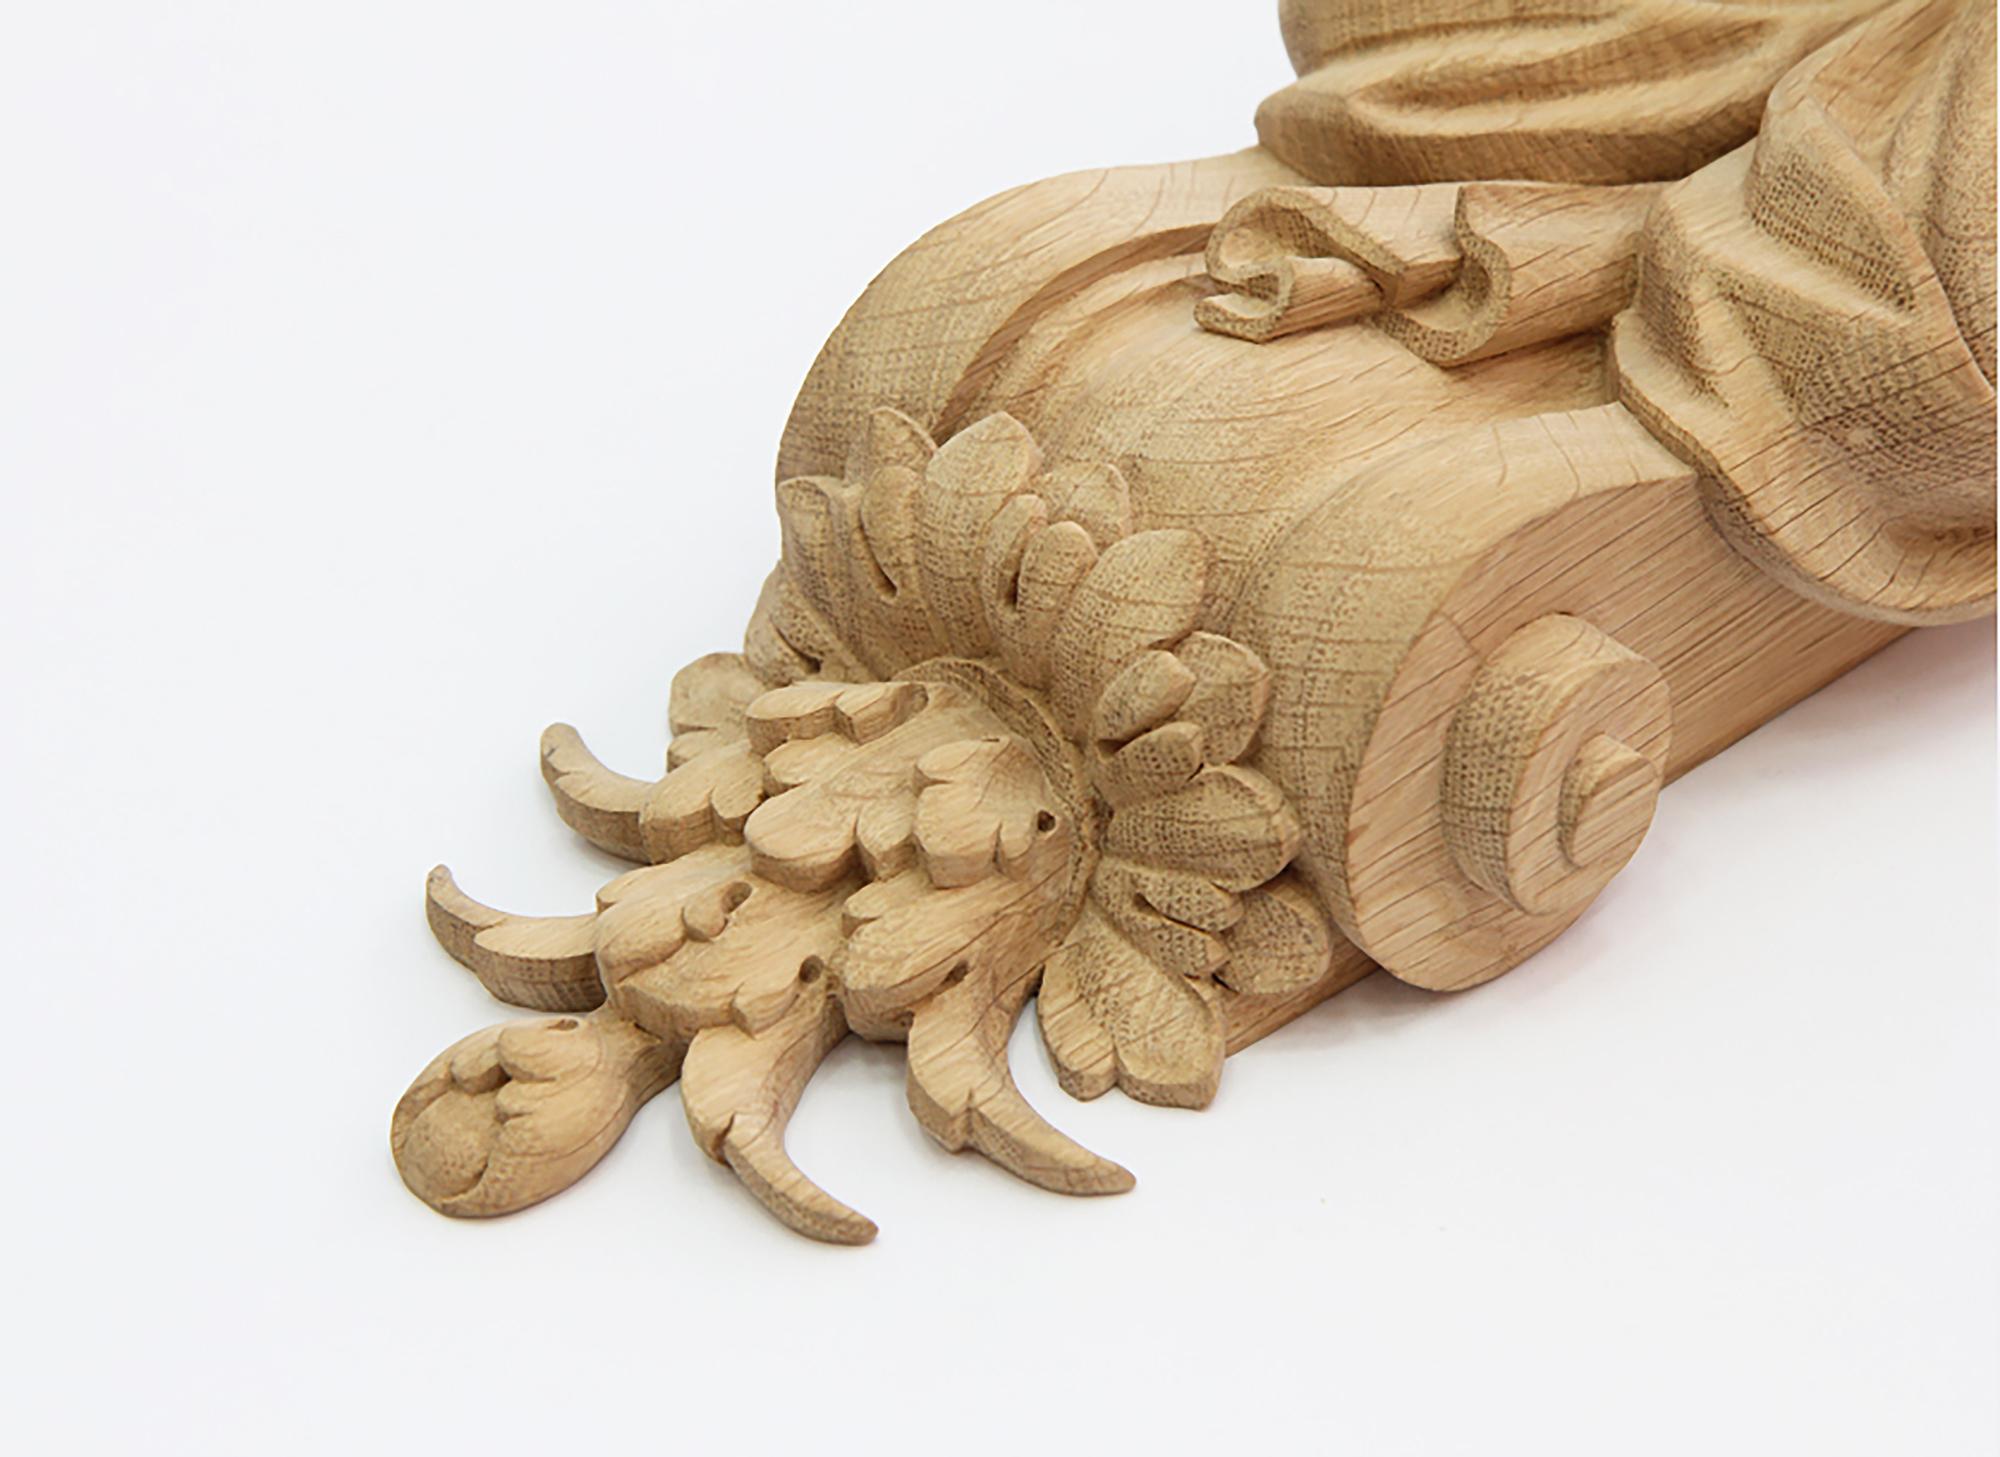 Woodwork Pair of Carved Wooden Corbels 